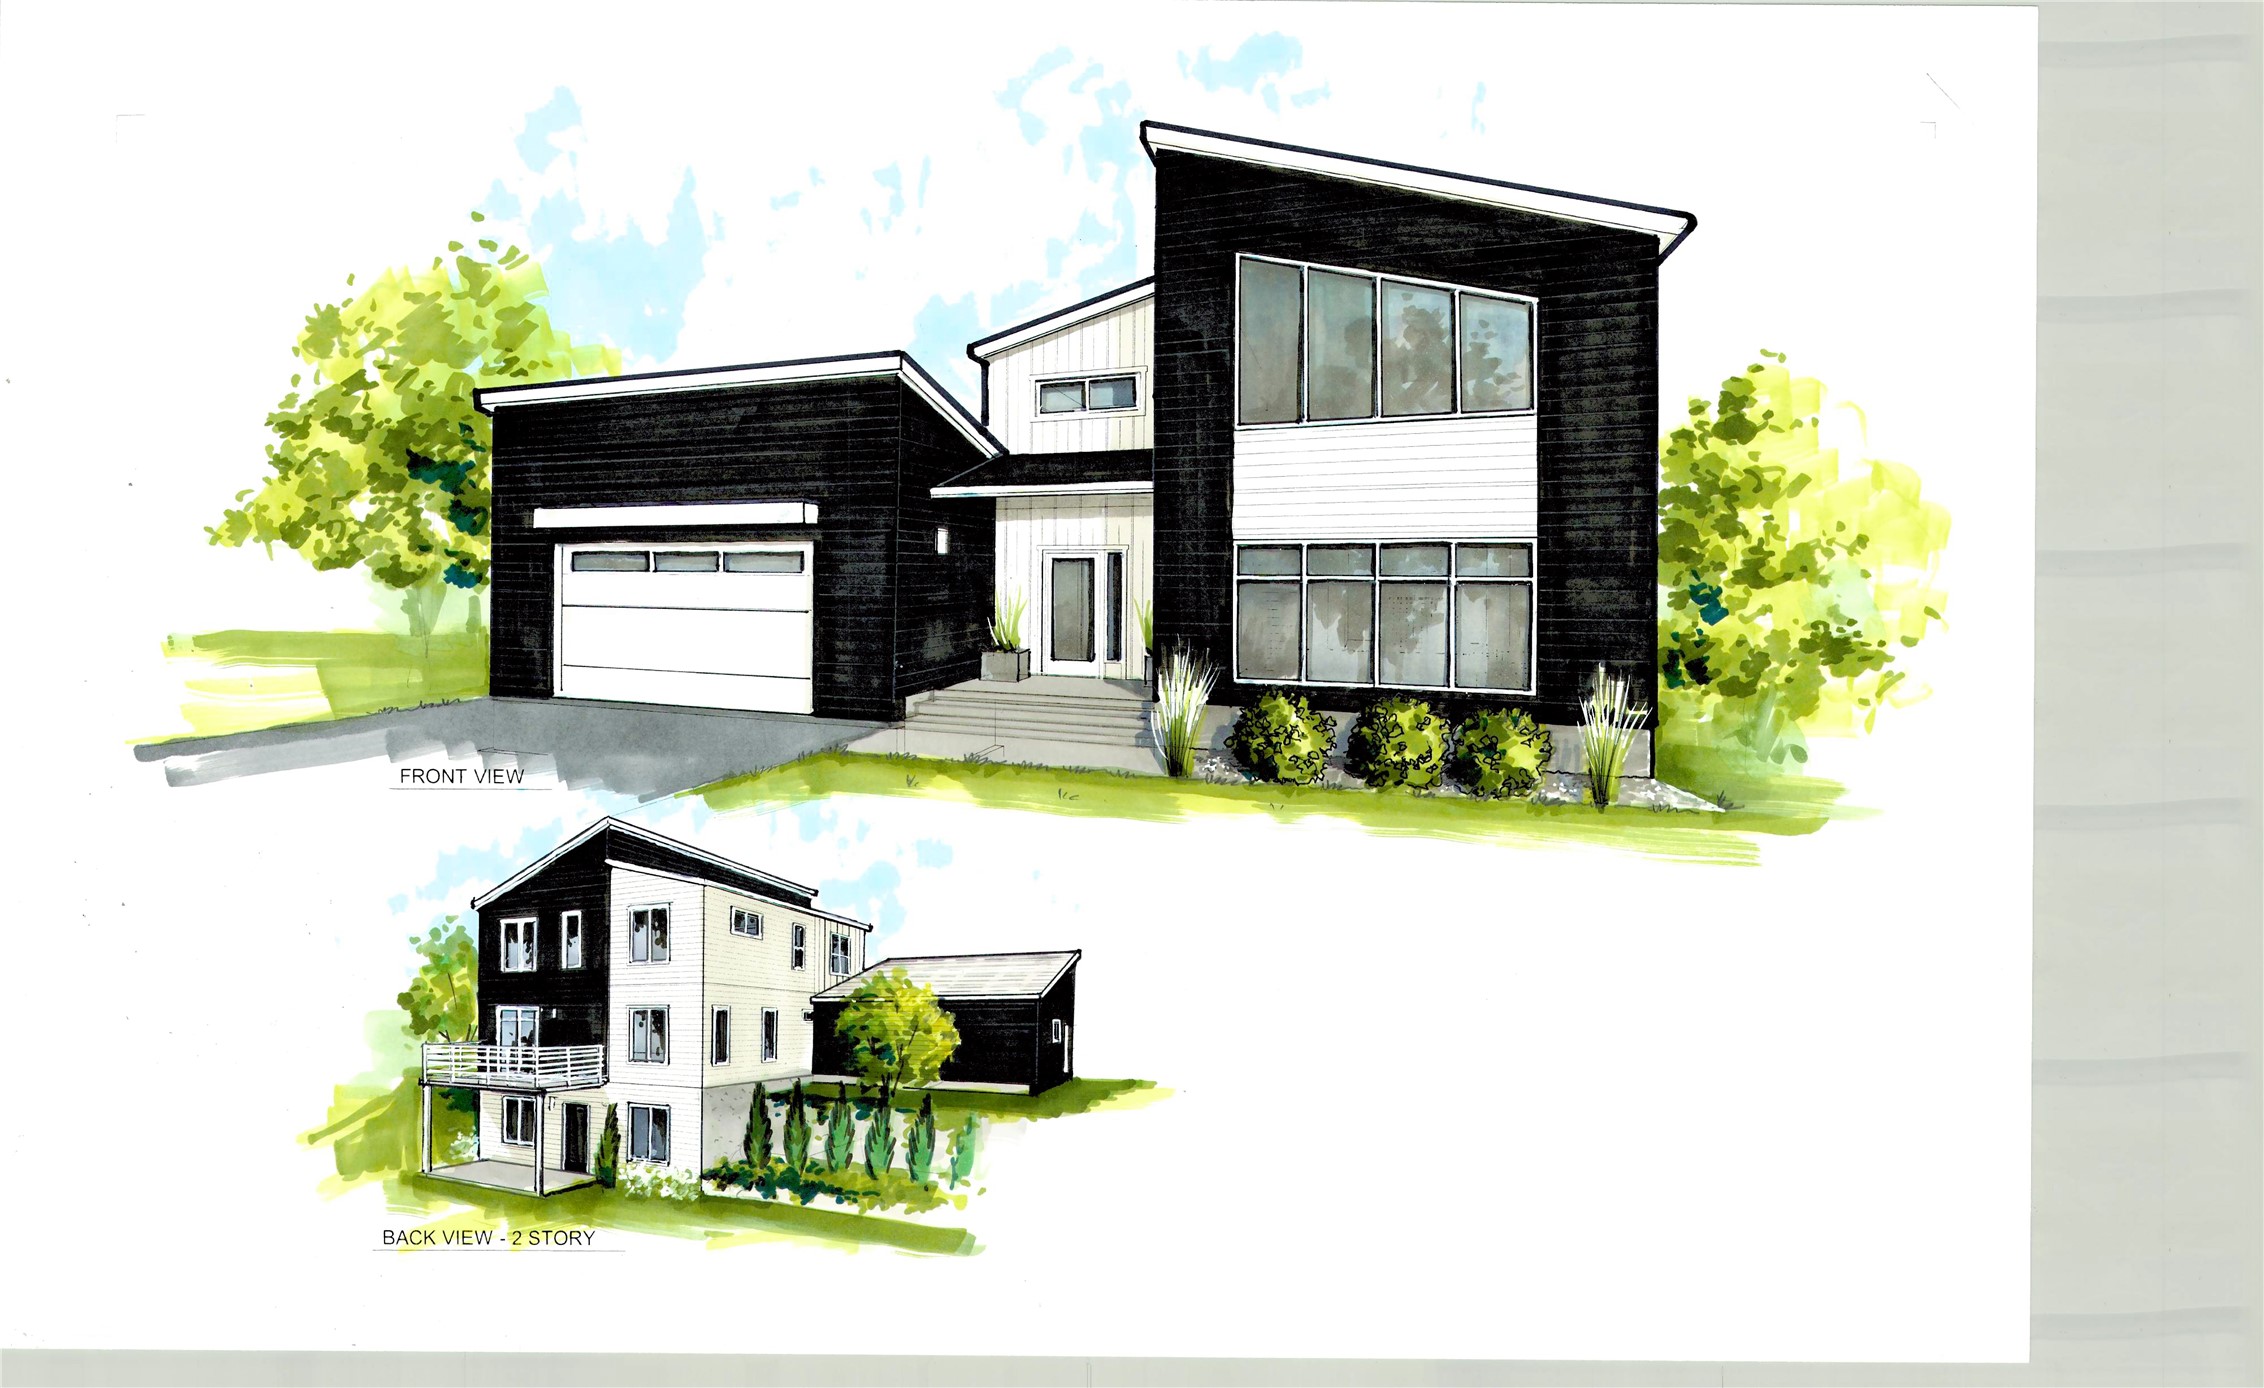 To be built mountain modern home in The Preserve Subdivision. House sits in a cul-de-sac located only minutes from FVCC, Logan Health, and Kalispell's major shopping areas. 4 beds, 2.5 baths with living room & family room. Open floor plan with lots of natural light and unfinished daylight basement. Kitchen will have granite or quartz countertops, stainless steel appliances, pantry, & large island. Home comes with AC, underground sprinklers, patio, deck, and attached two car garage. Subdivision offers walking trails, dog park, and play ground all within close distance to the home. Contact Cecil Waatti 406.890.4000 Layne Massie 406.270.6664 or your real estate professional.